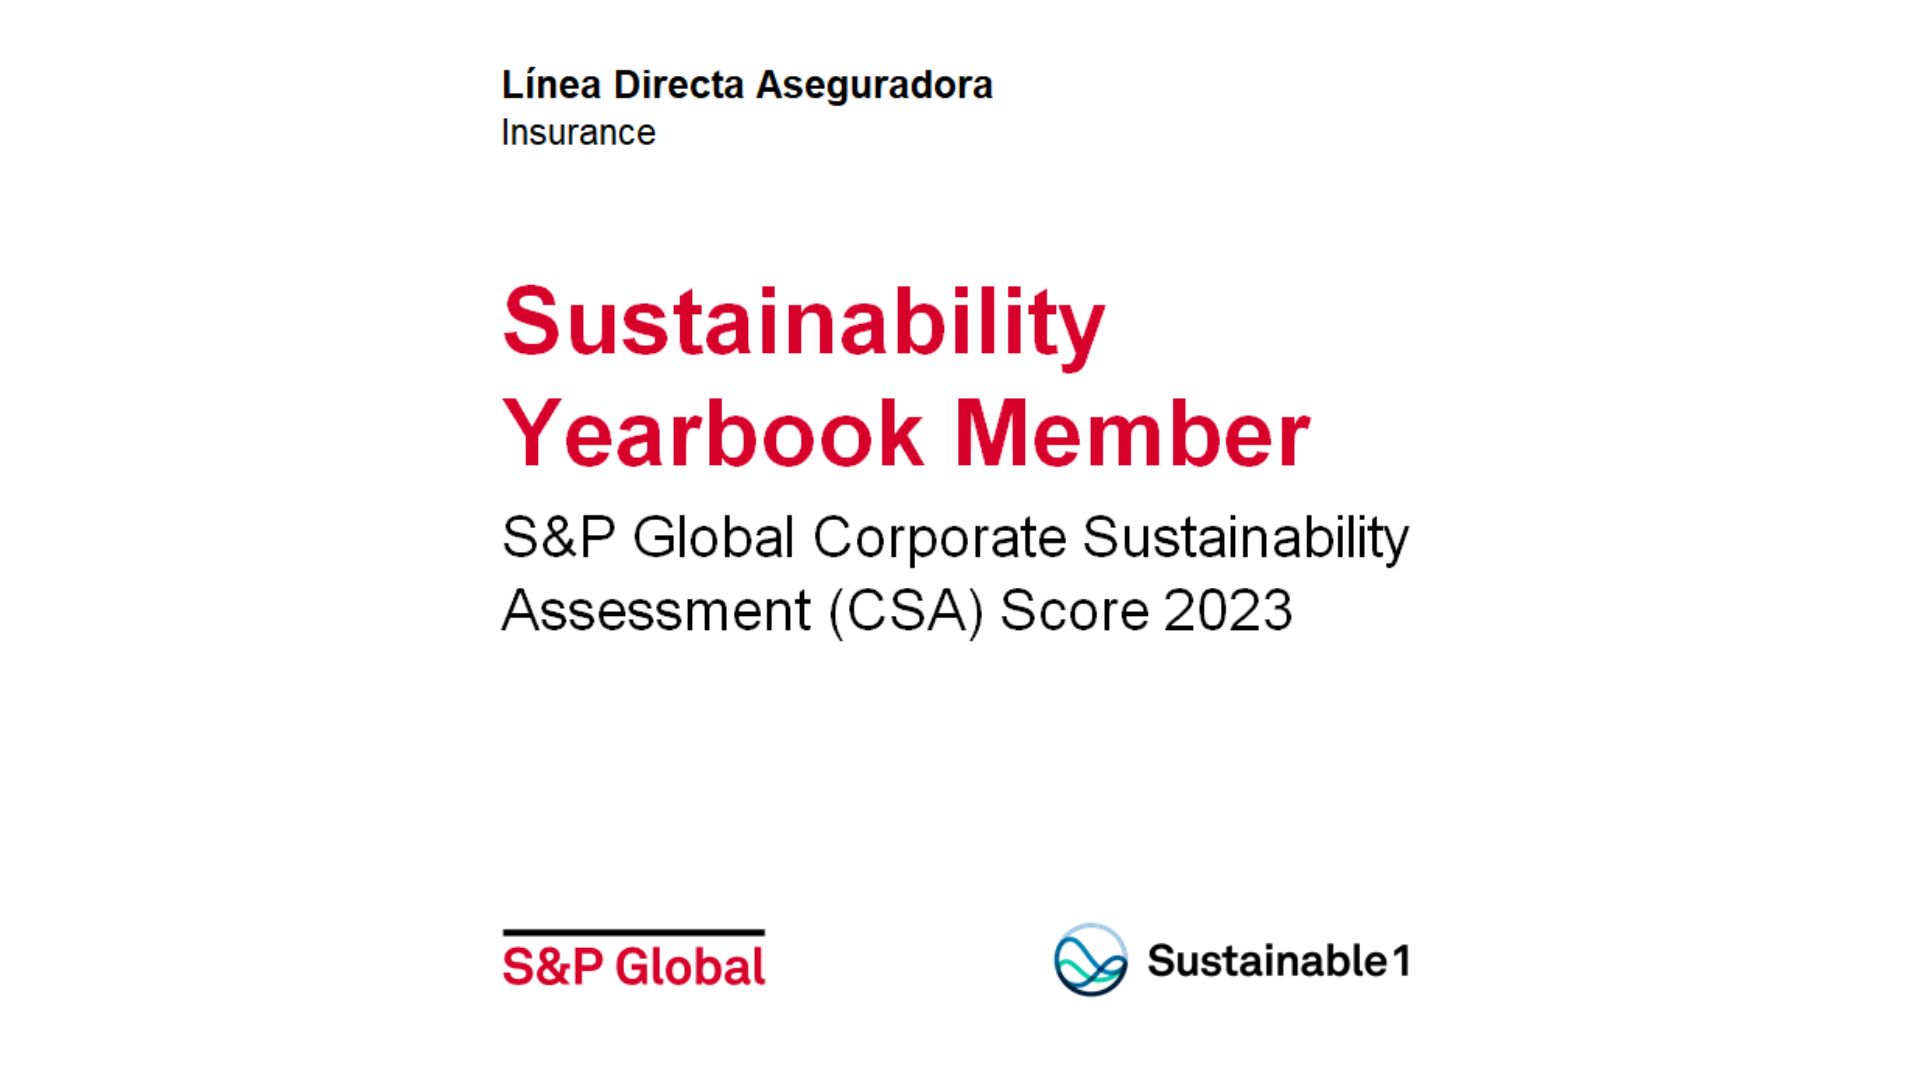 Certificate awarded to companies included in the S&P Global Sustainability Yearbook